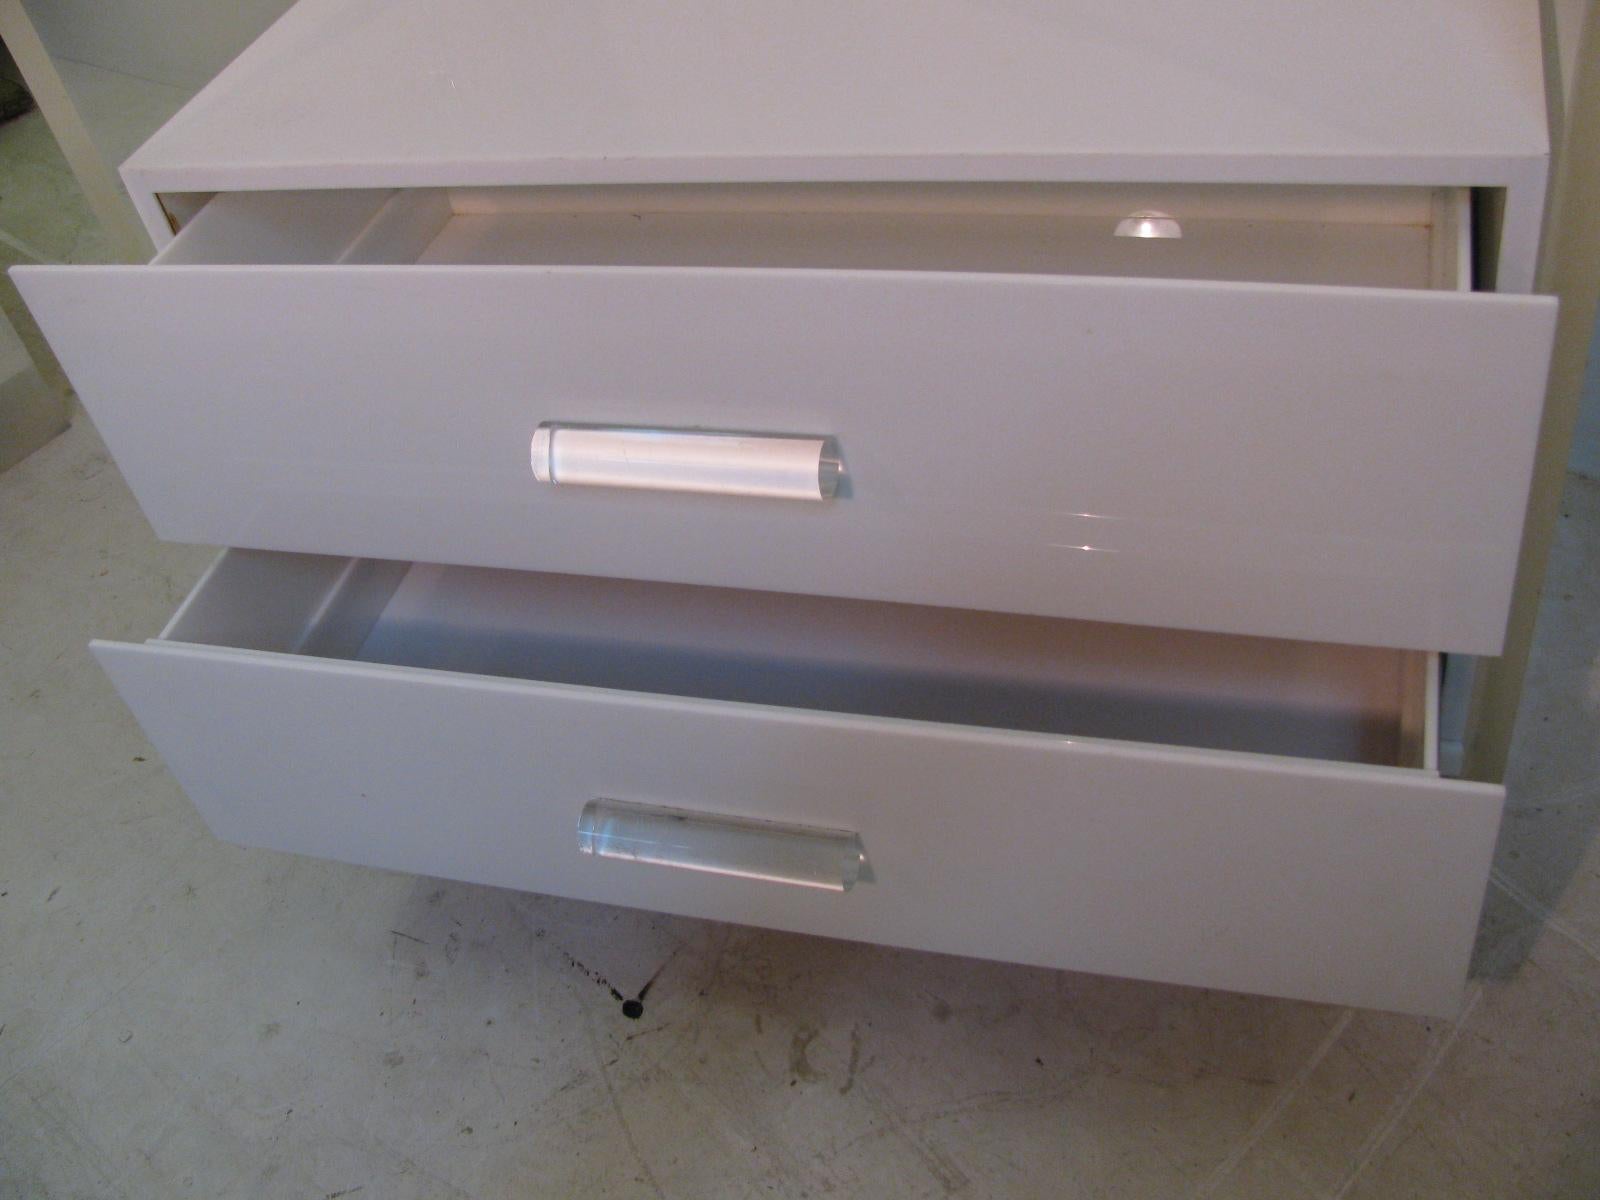 Late 20th Century Pair of Lucite Mid-Century Modern Étagères with Double Drawer Bottoms